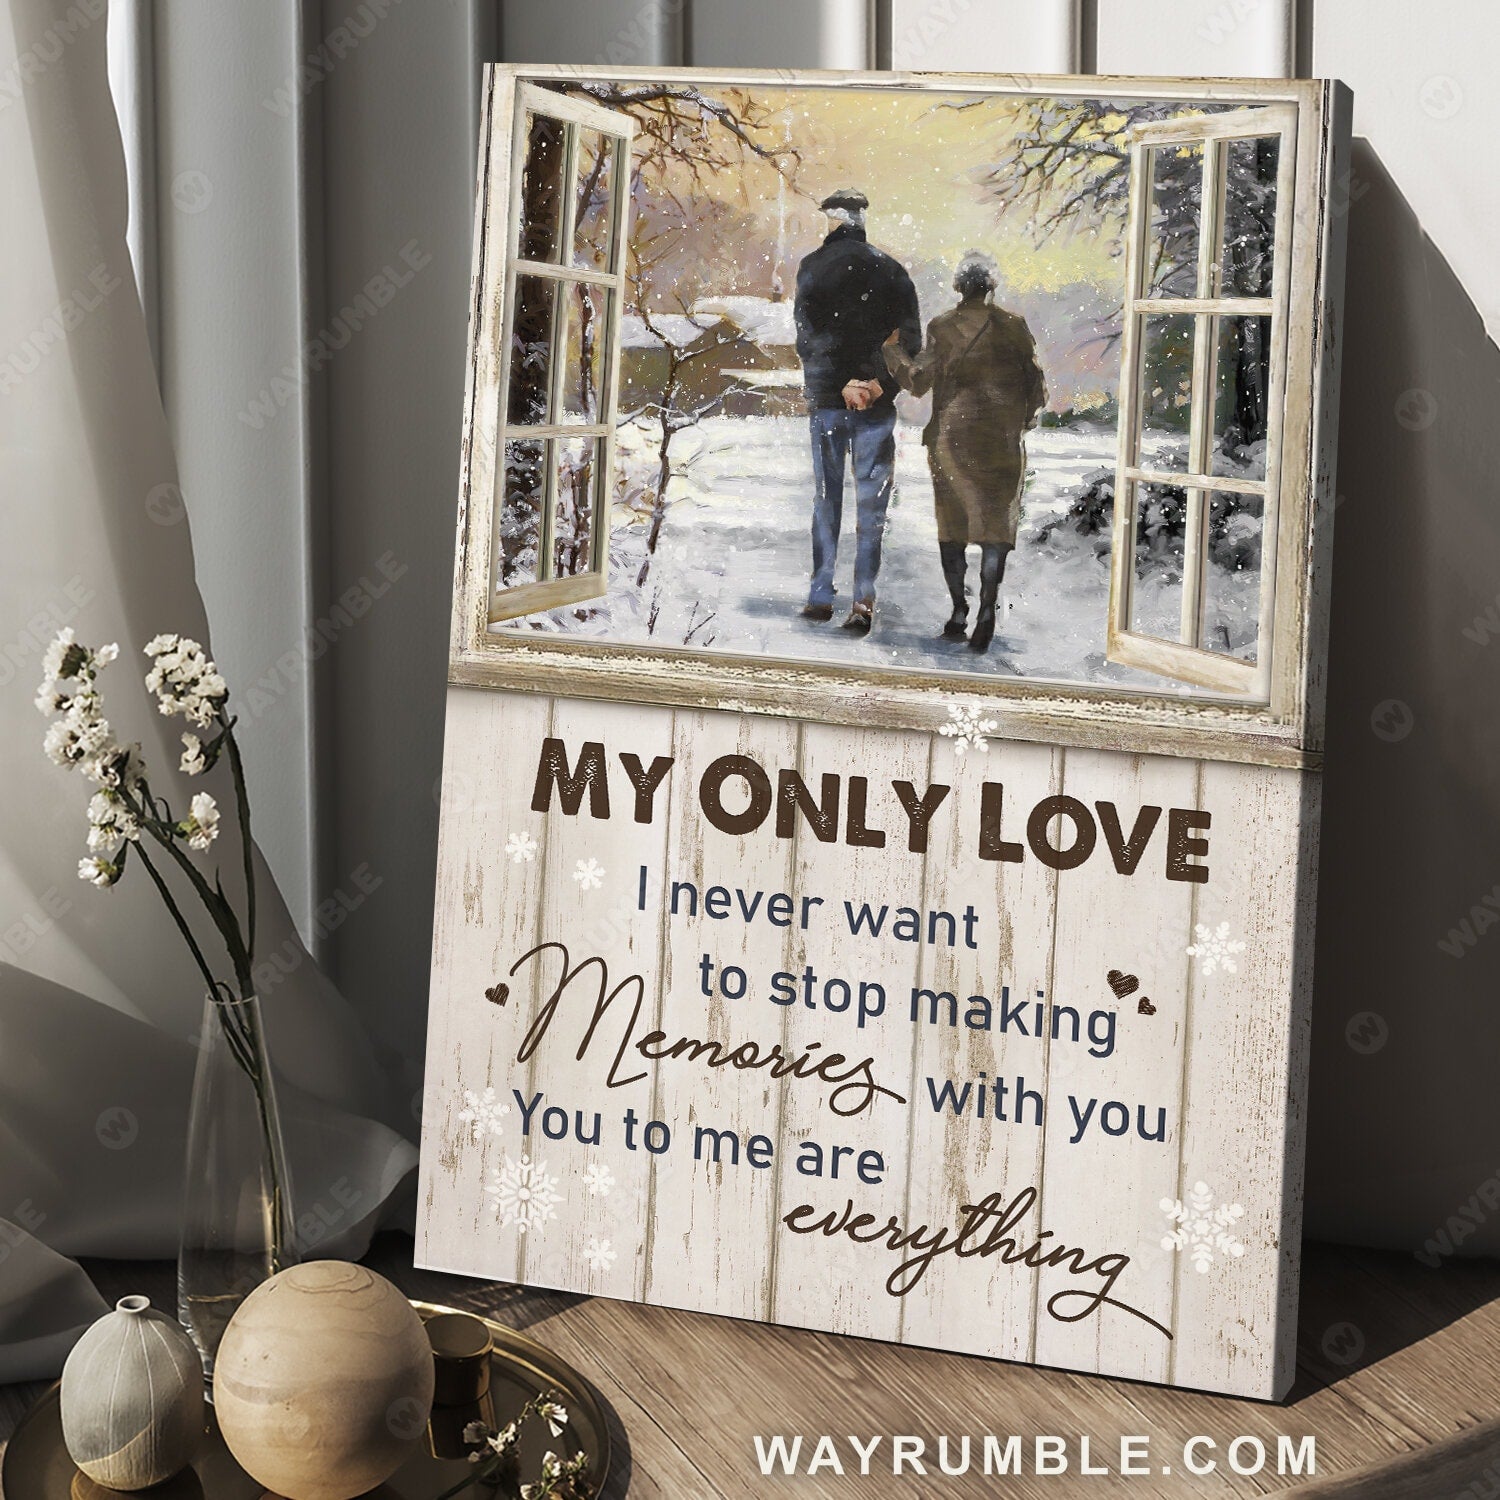 Old couple, Winter forest, Vintage window, I never want to stop making memories with you - Couple Portrait Canvas Prints, Wall Art